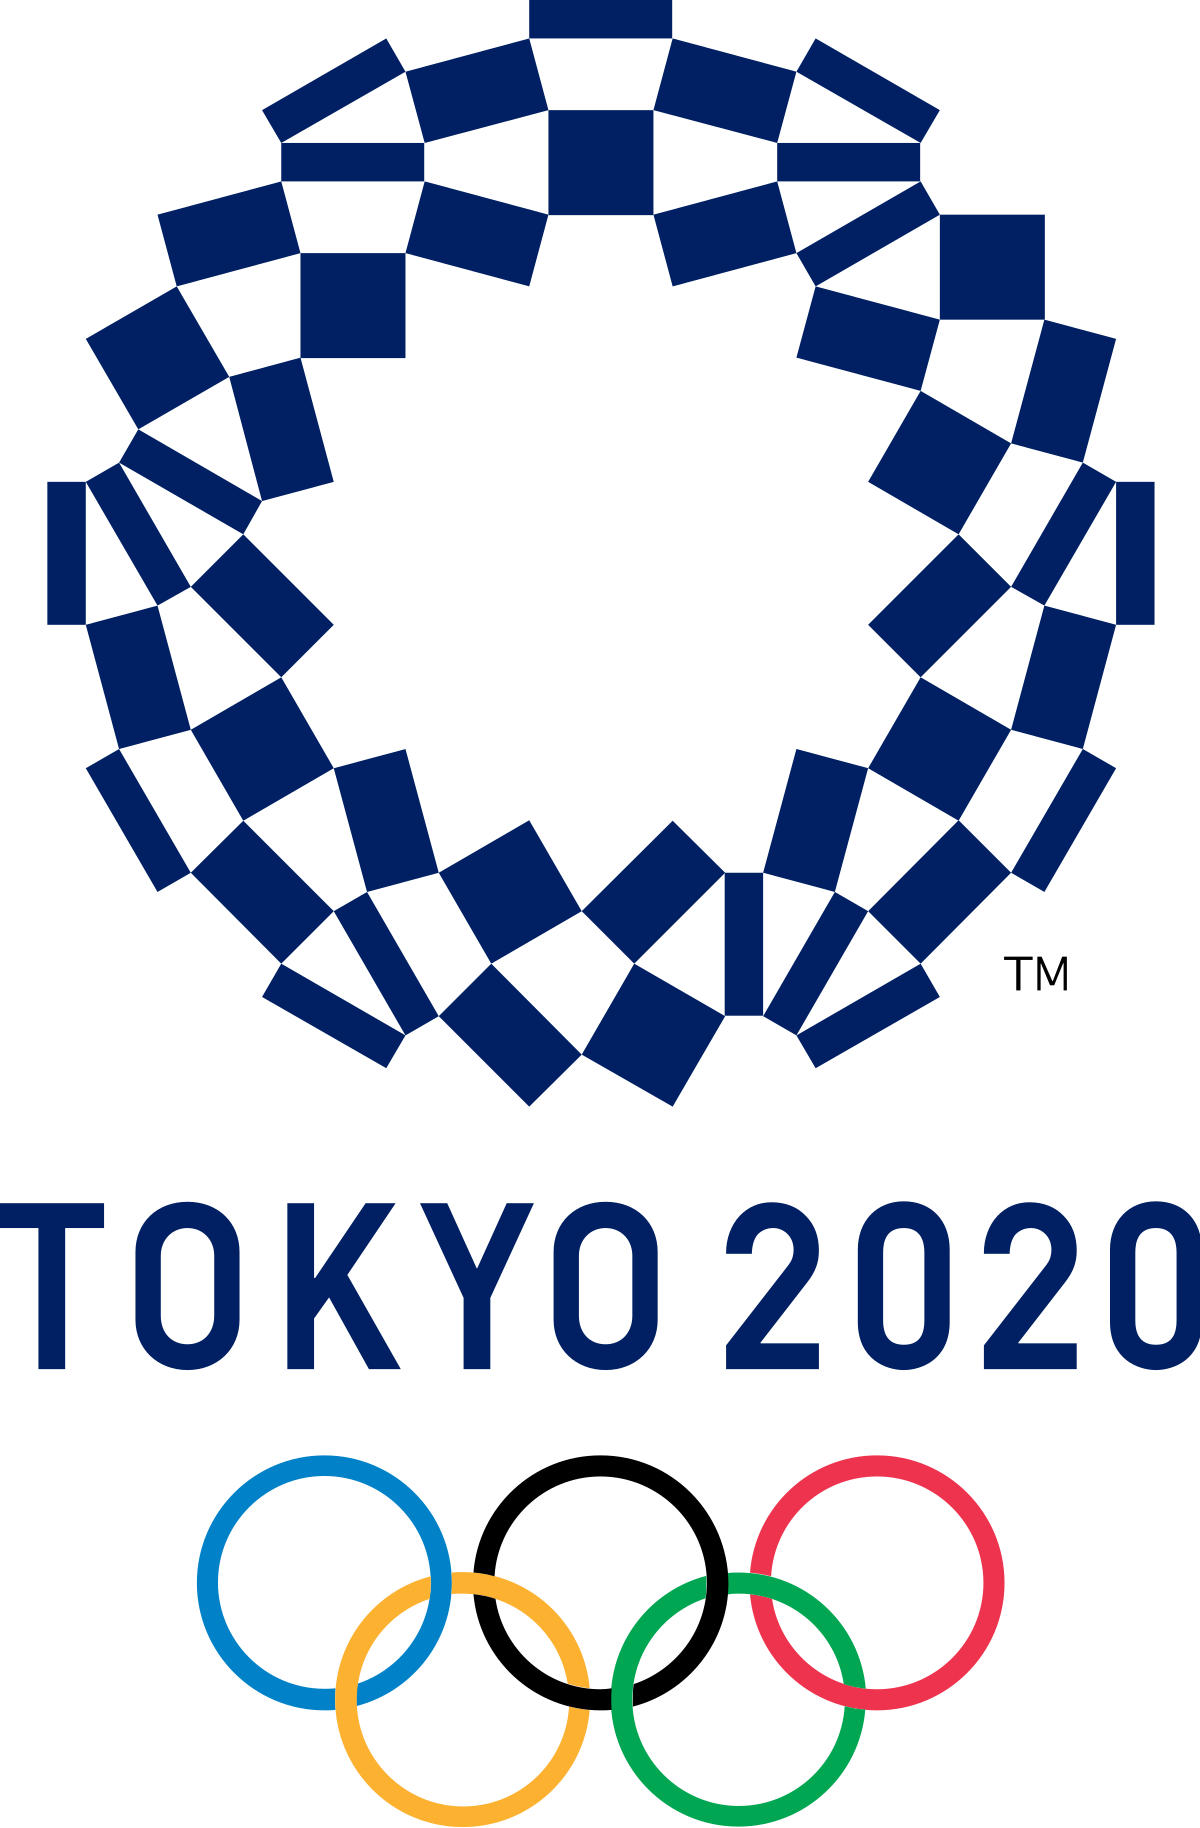 ADMAIORA at the Olympics game (Tokyo 2020)